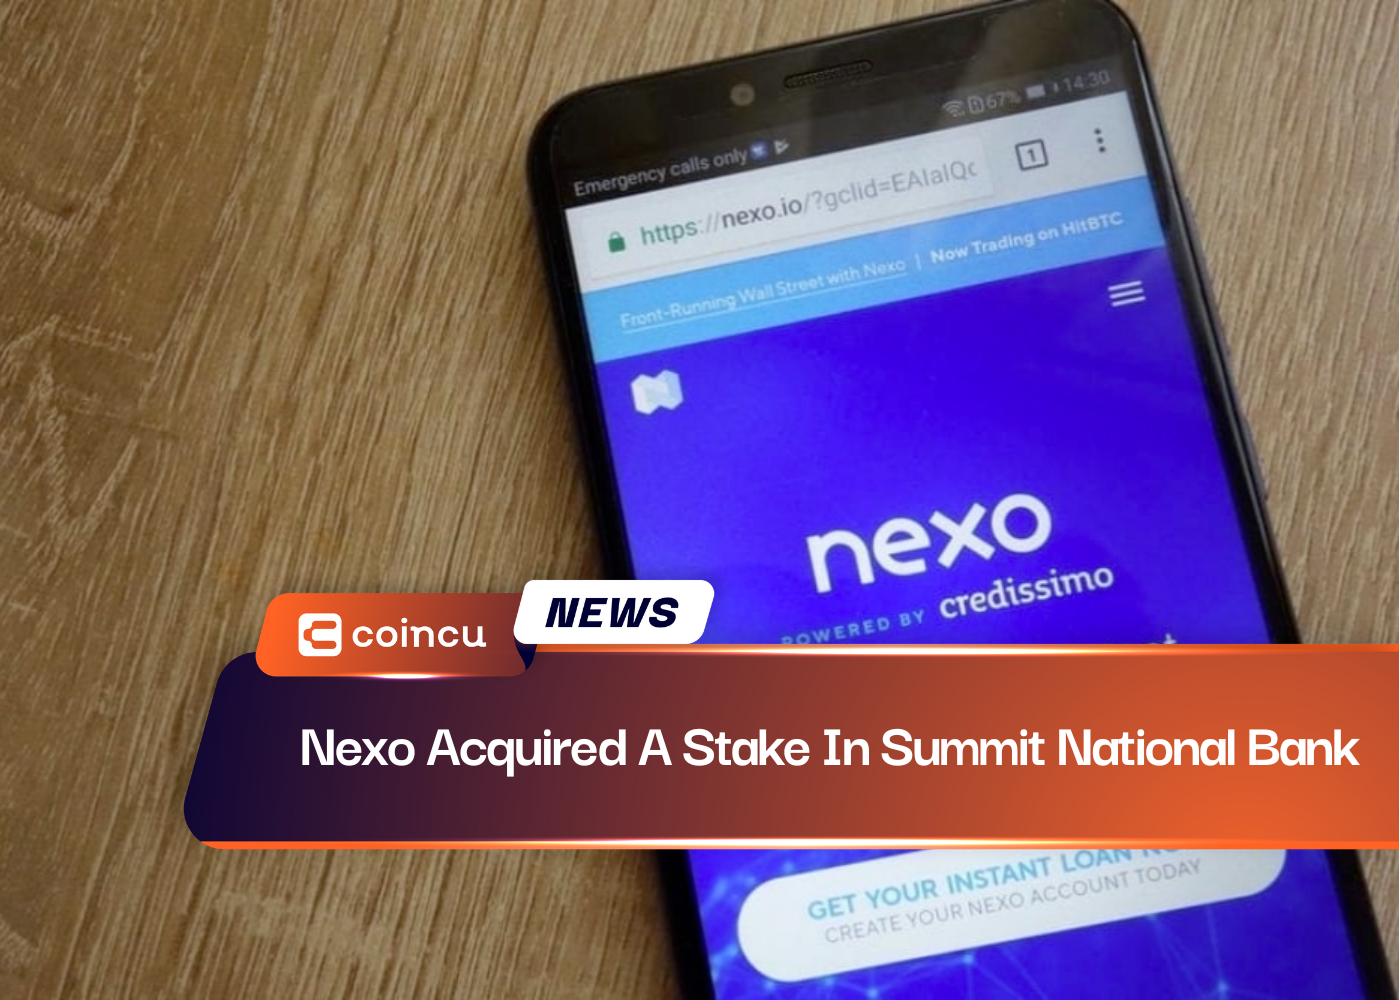 Nexo Acquired A Stake In Summit National Bank